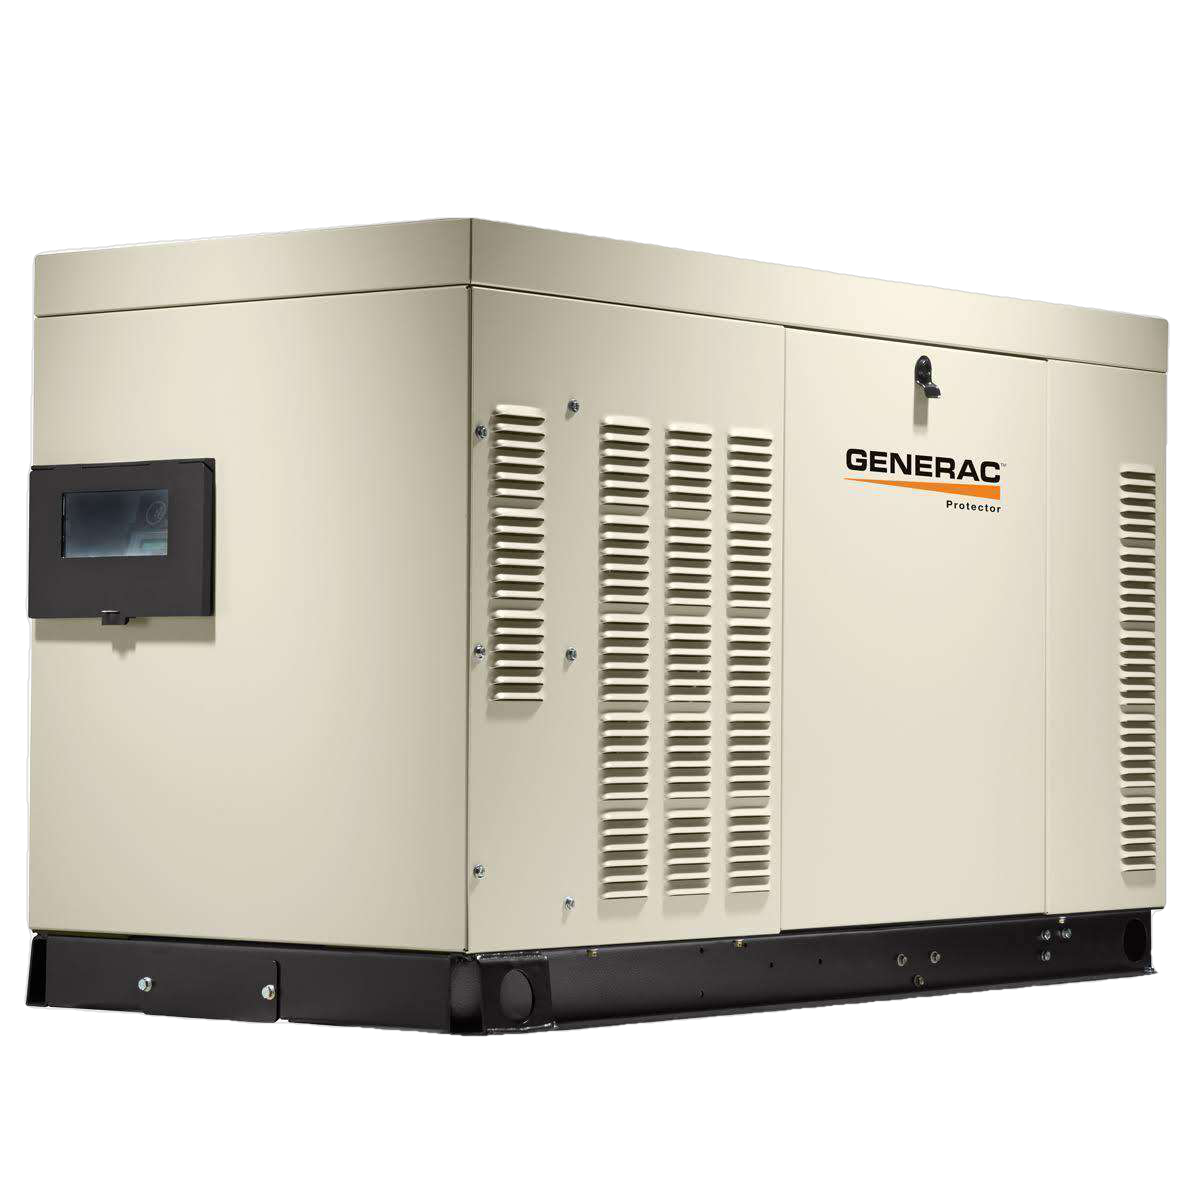 Generac Protector RG03624ANAX 36kW Liquid Cooled 1 Phase Standby Generator New